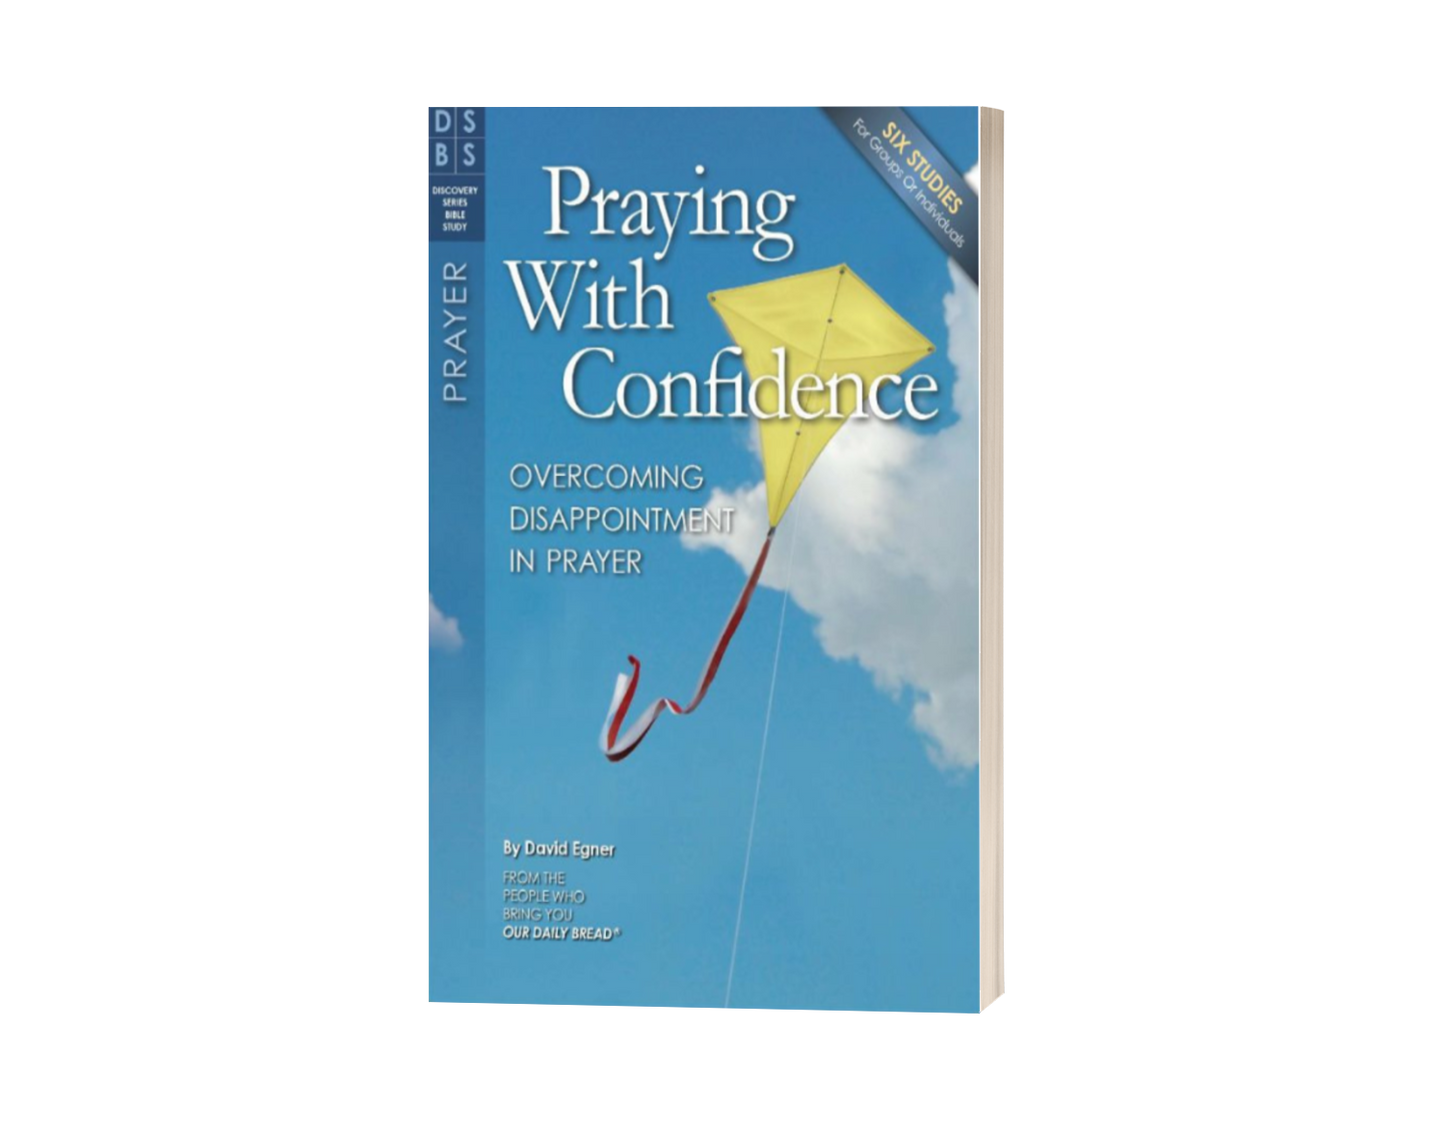 Praying With Confidence: Overcoming Disappointment in Prayer